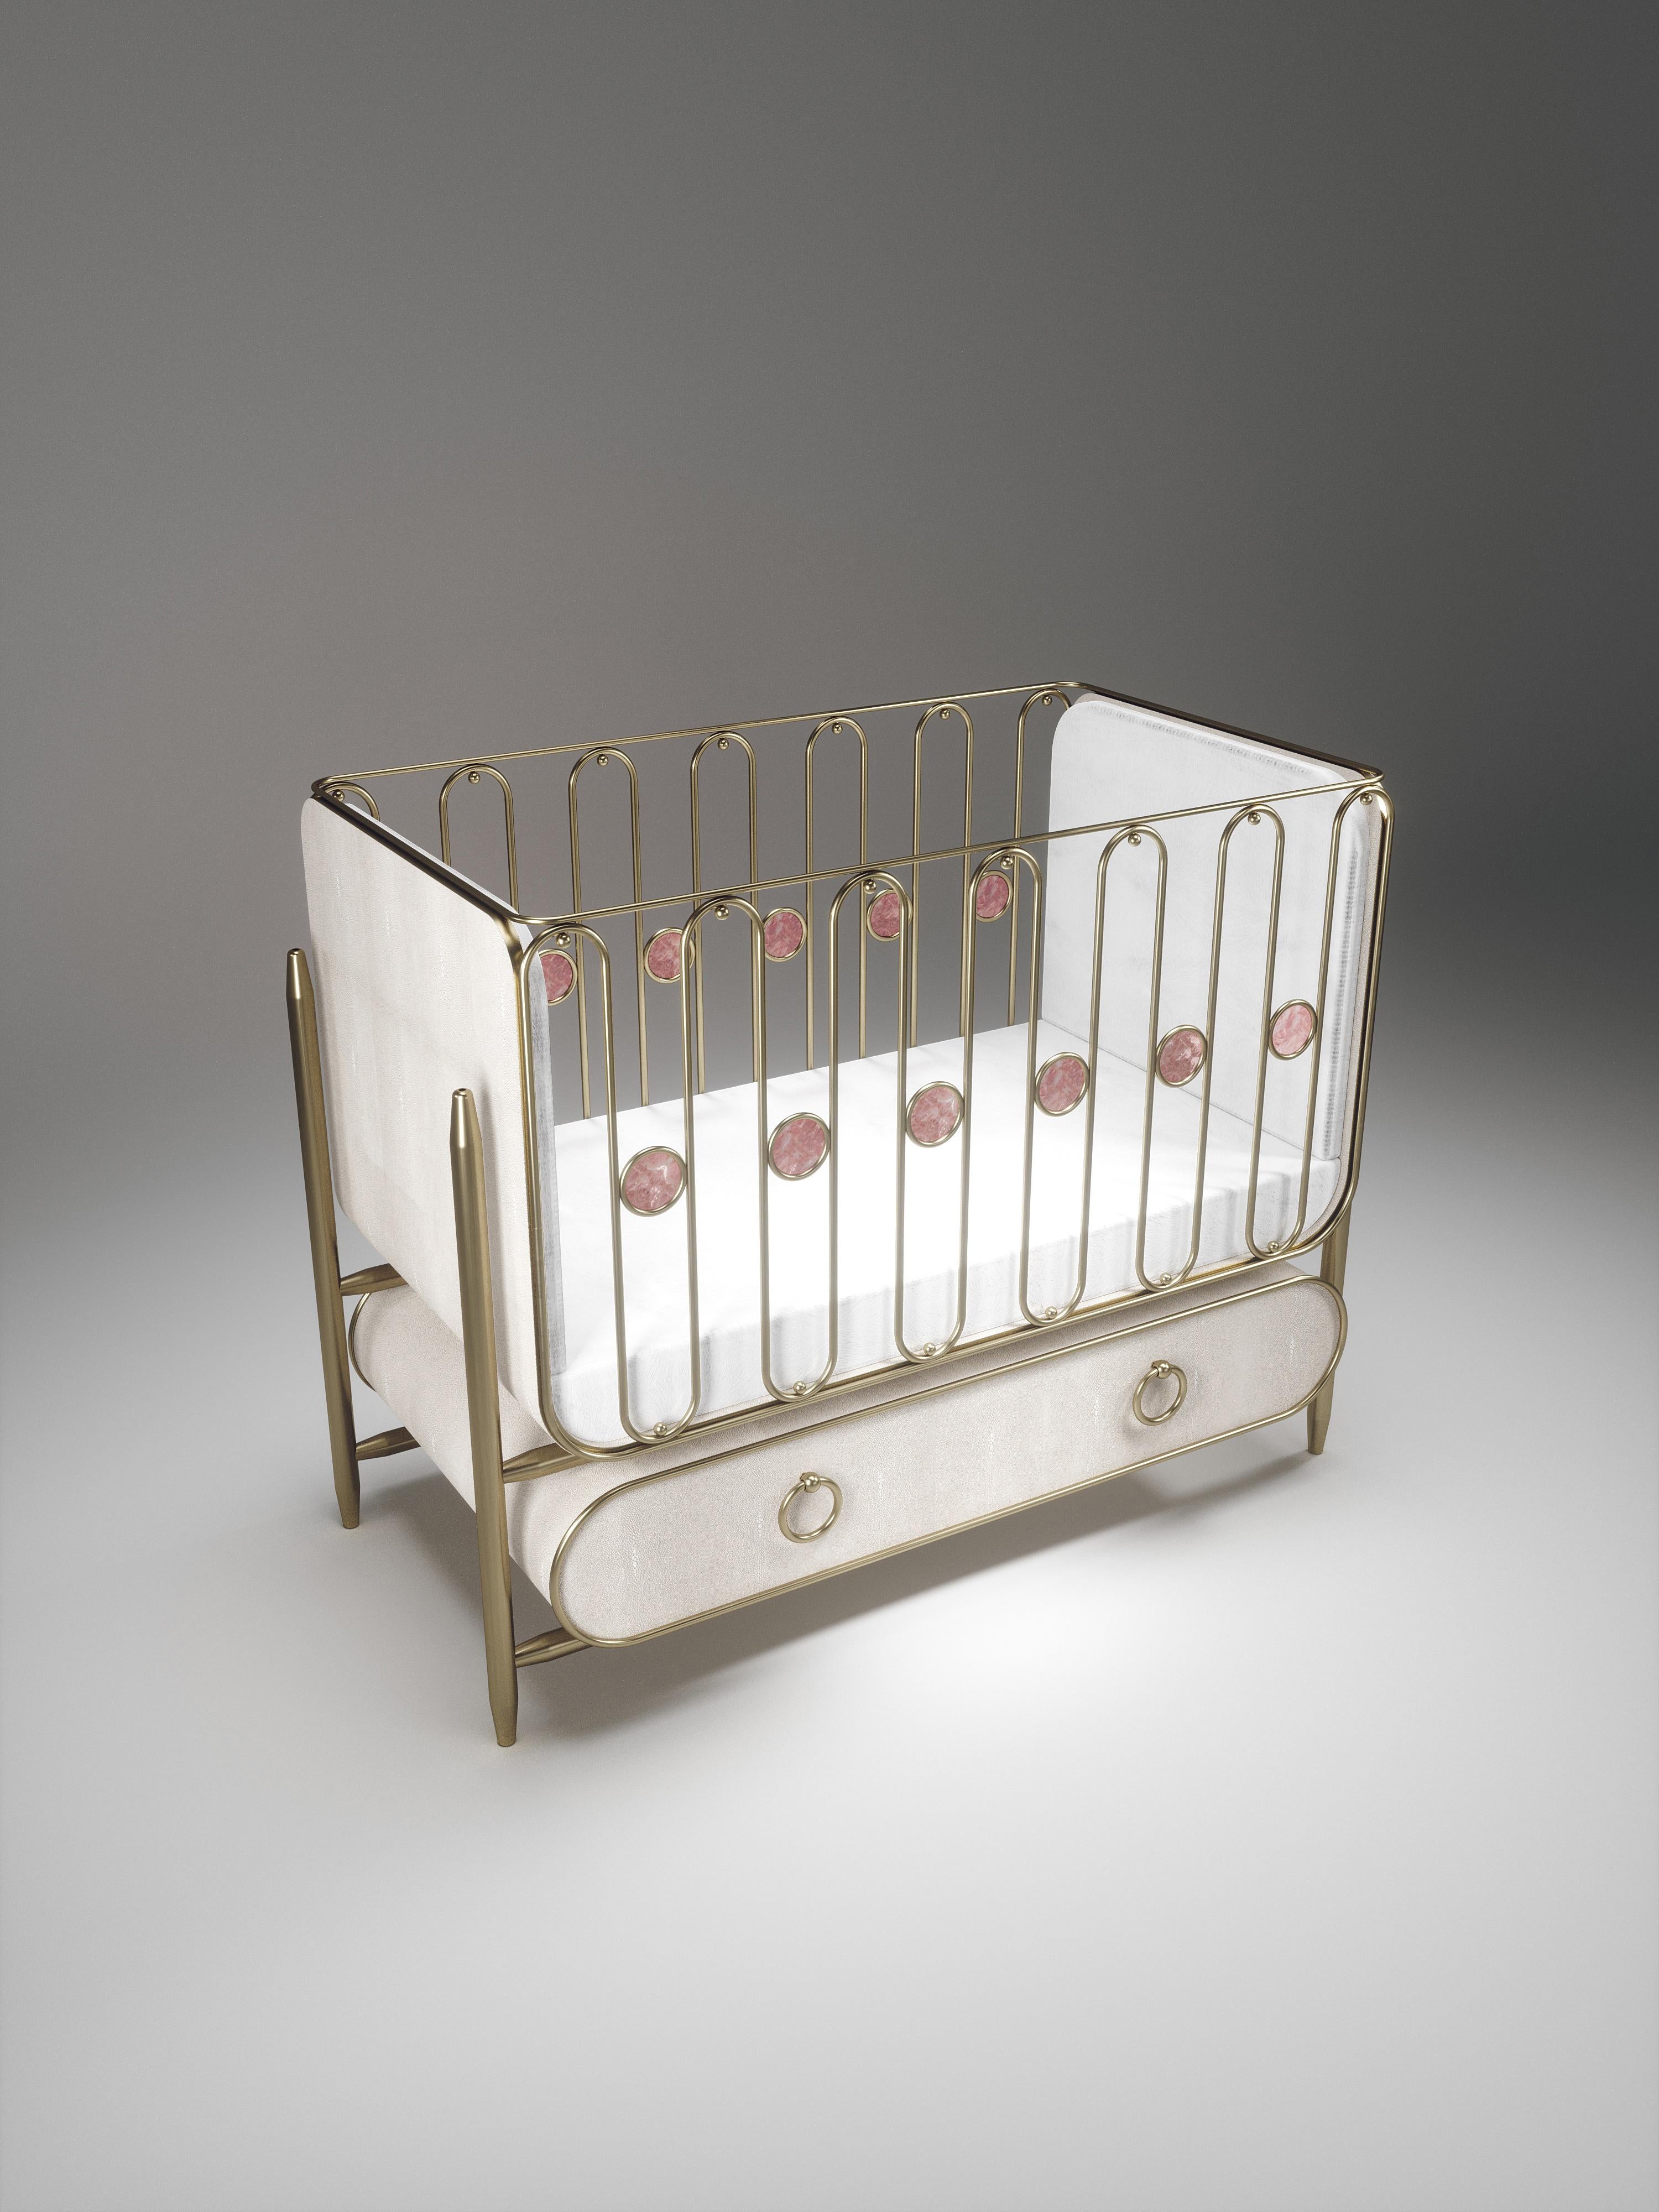 The Riviera Baby Crib by Kifu Paris is the ultimate luxury piece for your child's bedroom. Inspired by the birth of her first child, Kifu Augousti designed this piece to embrace the whimsical world of a child. The piece is inlaid in cream shagreen